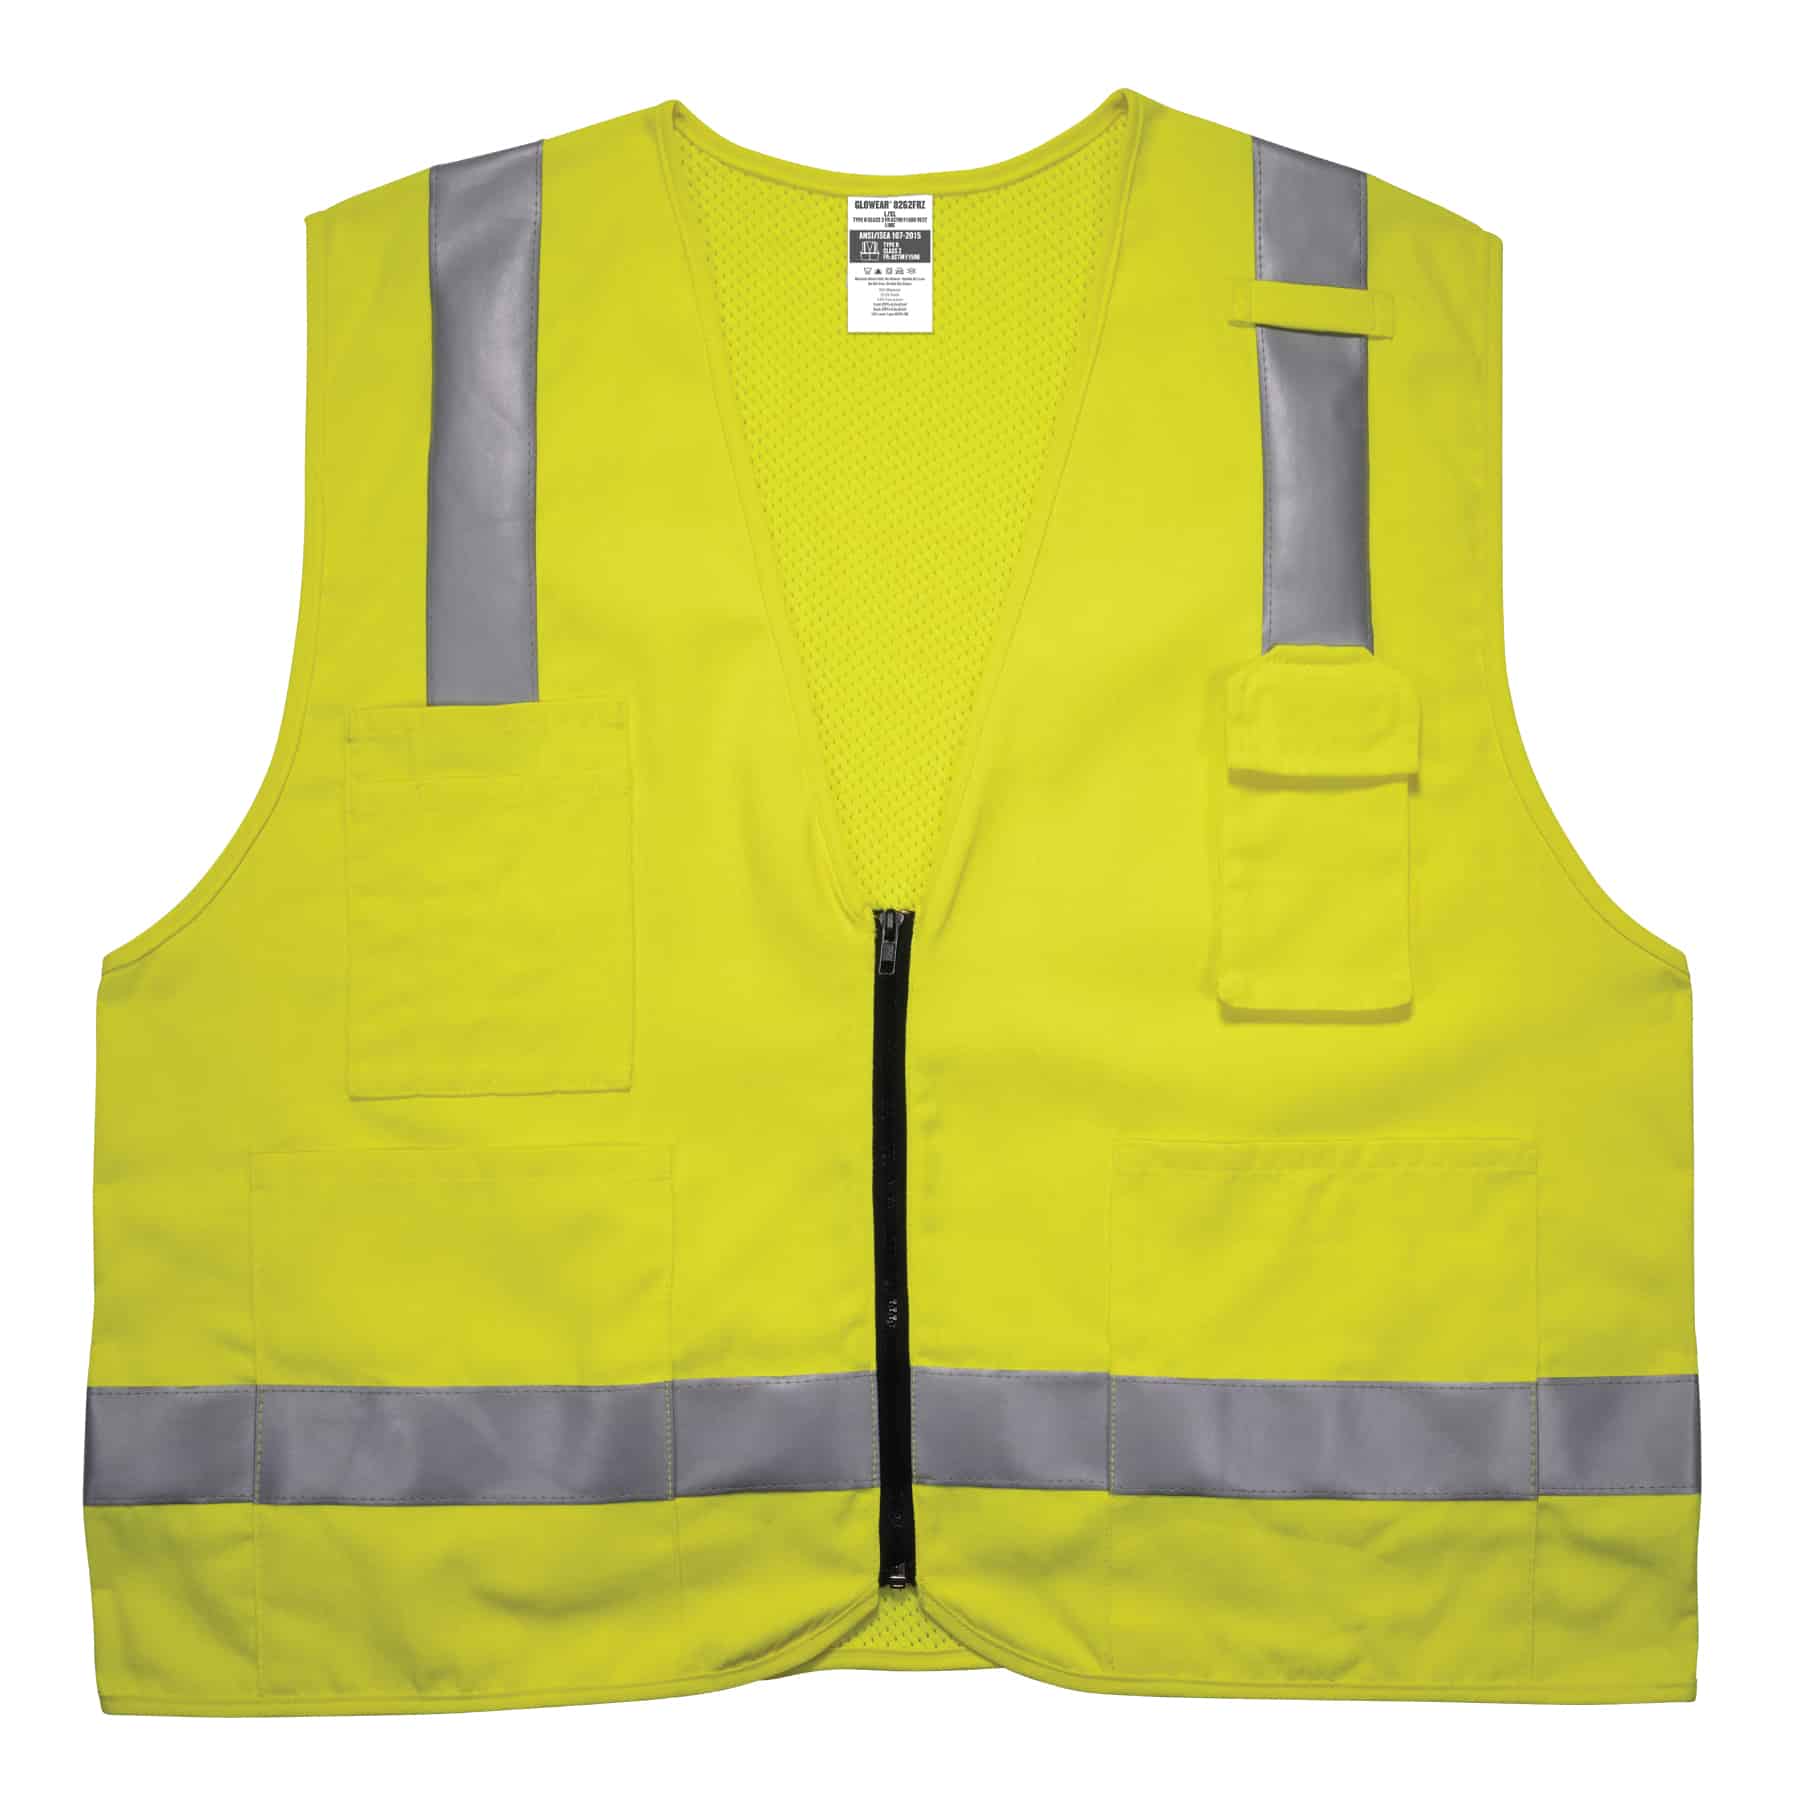 4-XL/  ANSI CLASS 2 High Visibility Safety Vest Solid Lime Front/ Mesh Back 